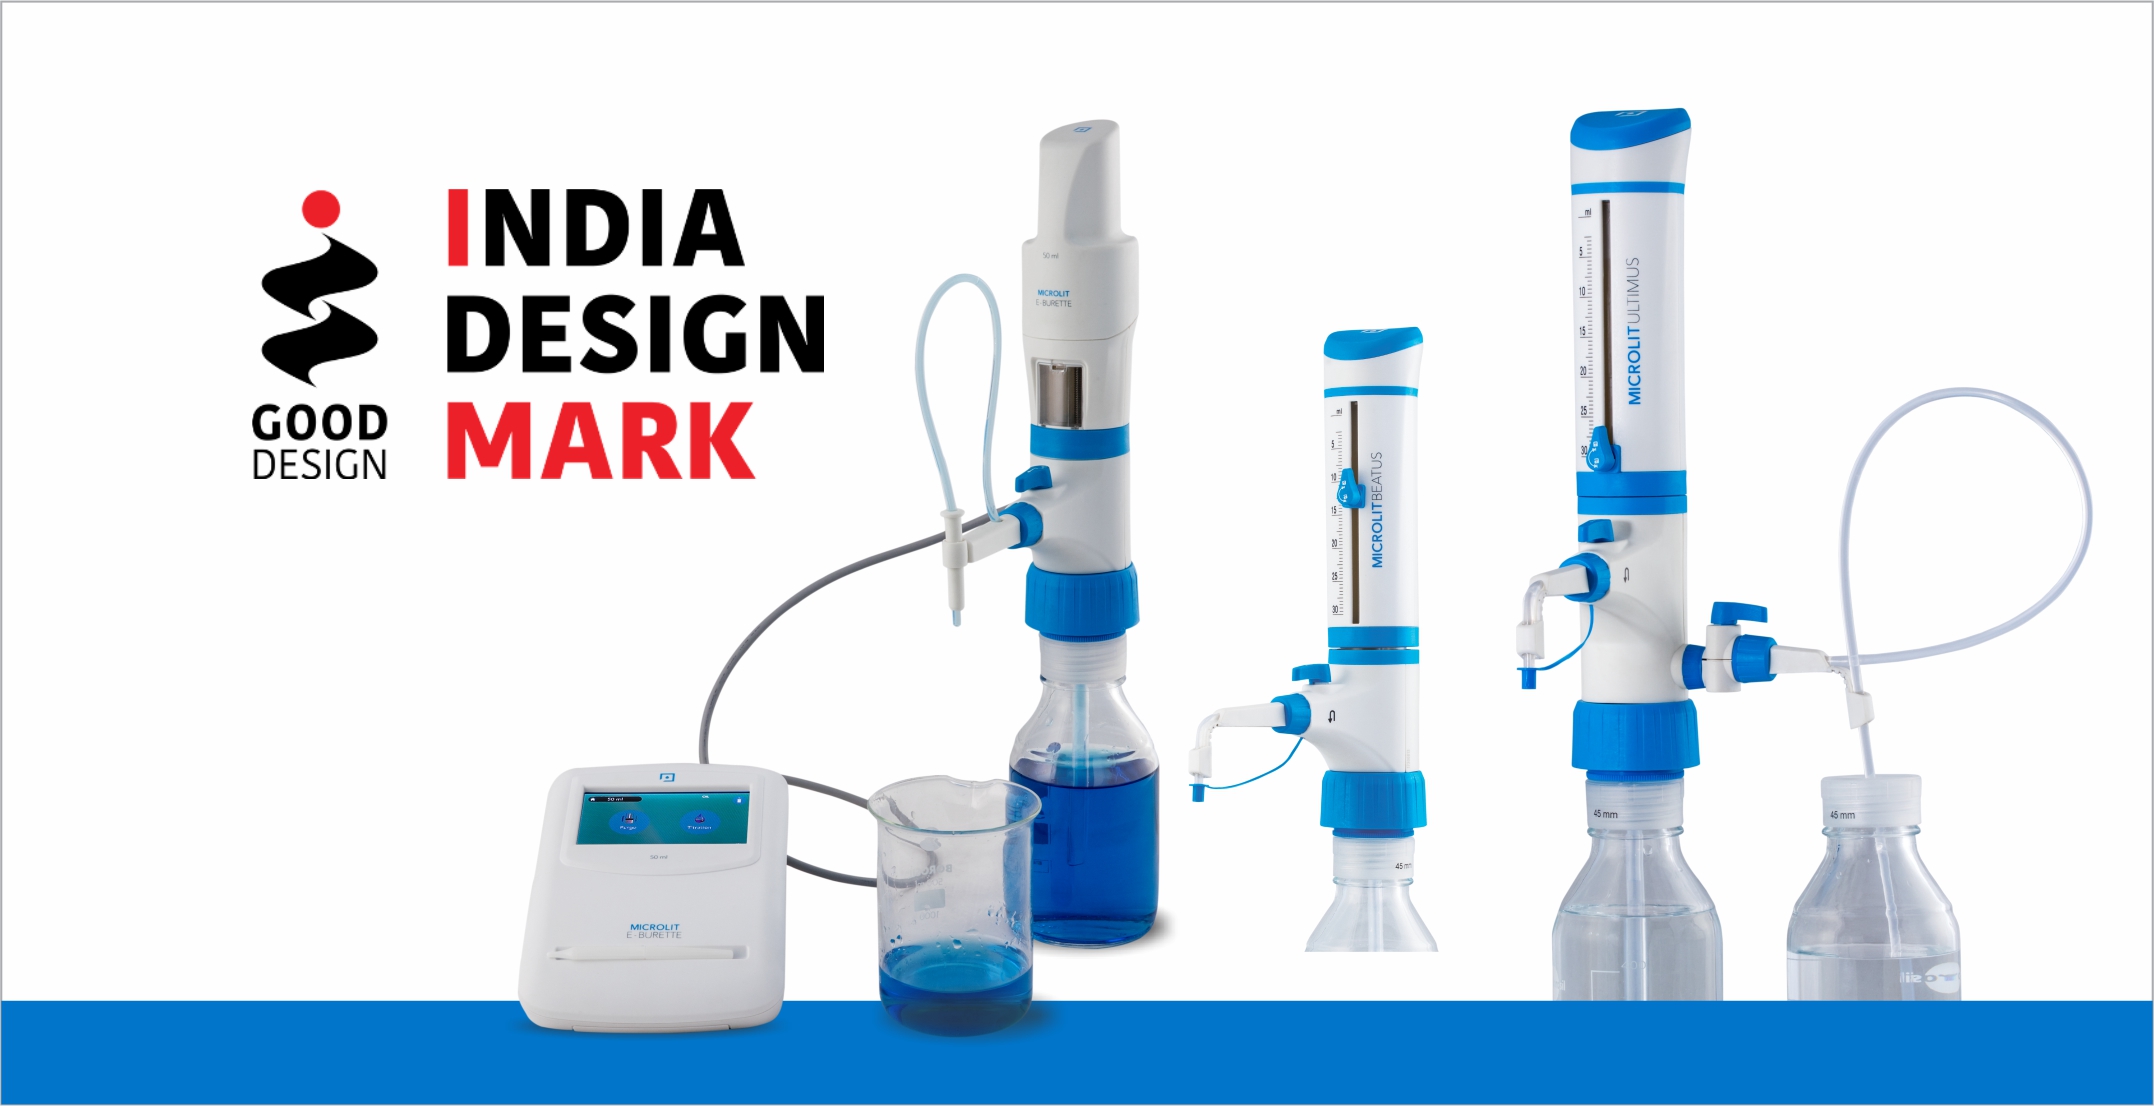 India Design Mark – A Trustworthy Indicator of Excellence